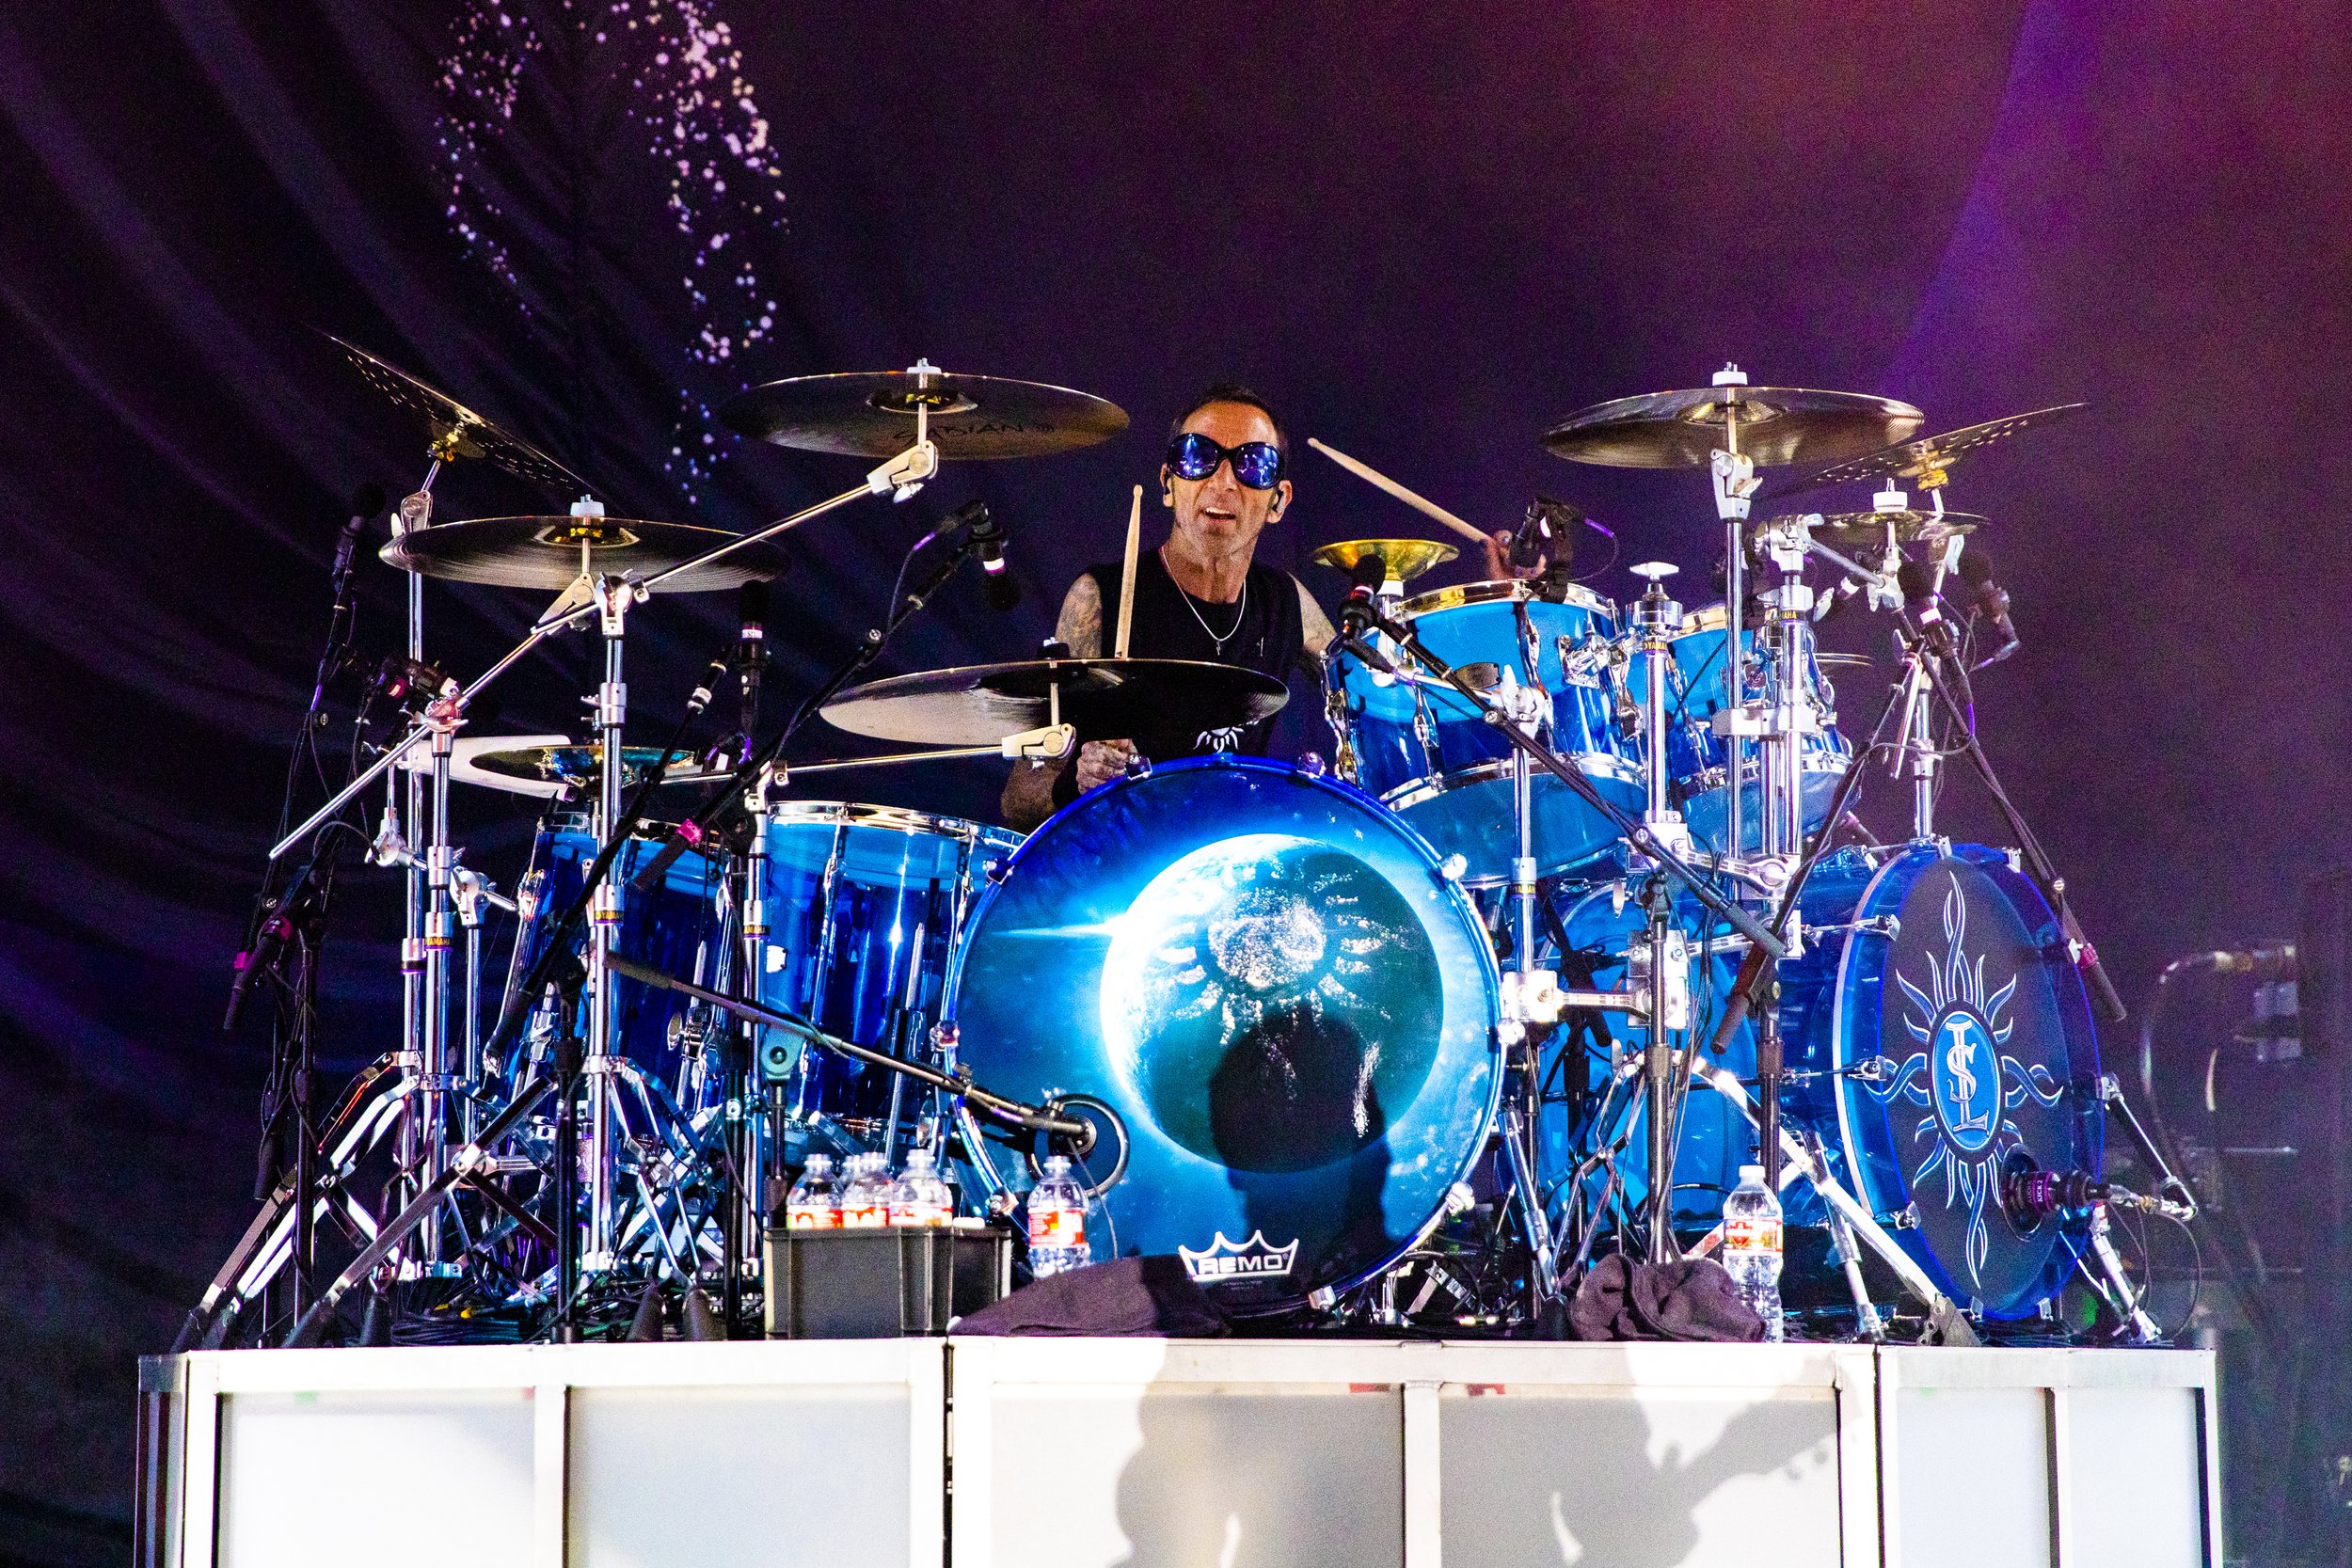 Godsmack, I Prevail, Bad Omens, Fame On Fire - 107.9 KBPI BIRTHDAY BASH - Fiddler's Green Amphitheatre - Greenwood Village, Colorado - Thursday, May 4, 2023- PHOTO BY Mowgli Miles of Interracial Friends-131.JPG